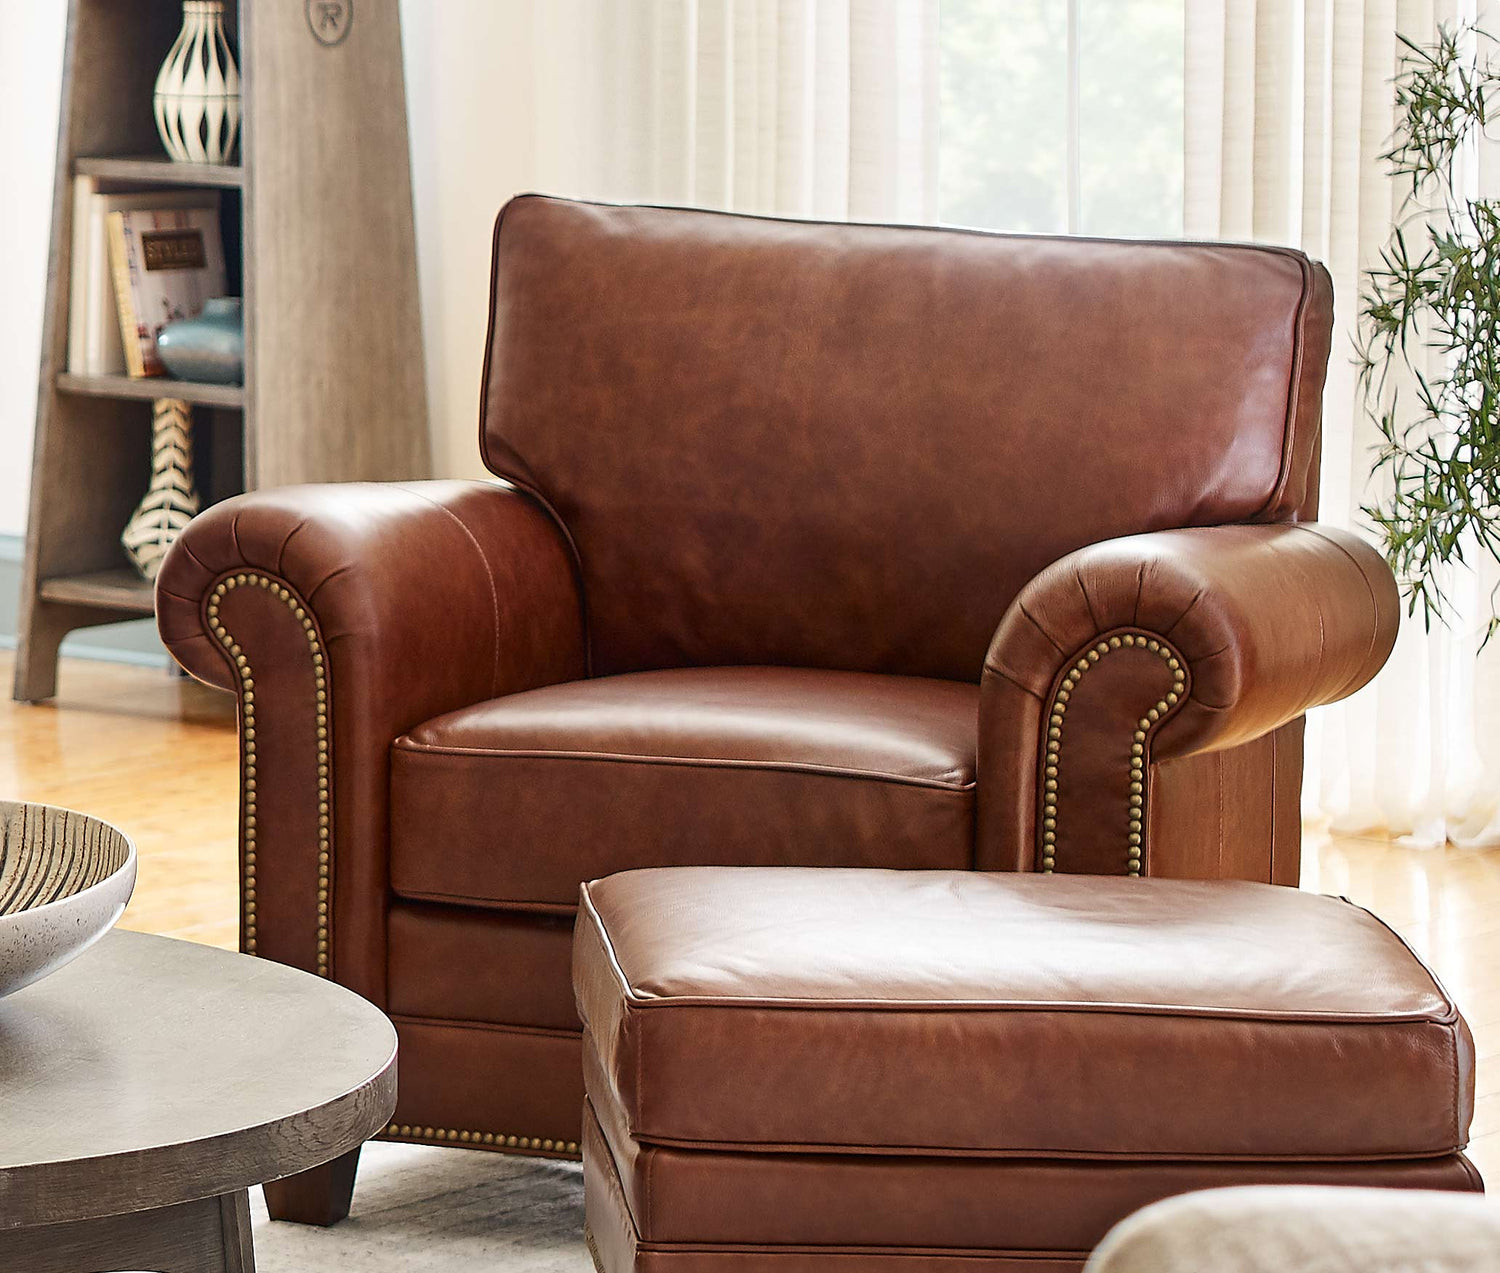 Lifestyle of a reddish brown leather Malden Chair sitting in front of a large glass window, the image shows off the nailhead that is the defining feature of the Malden line.